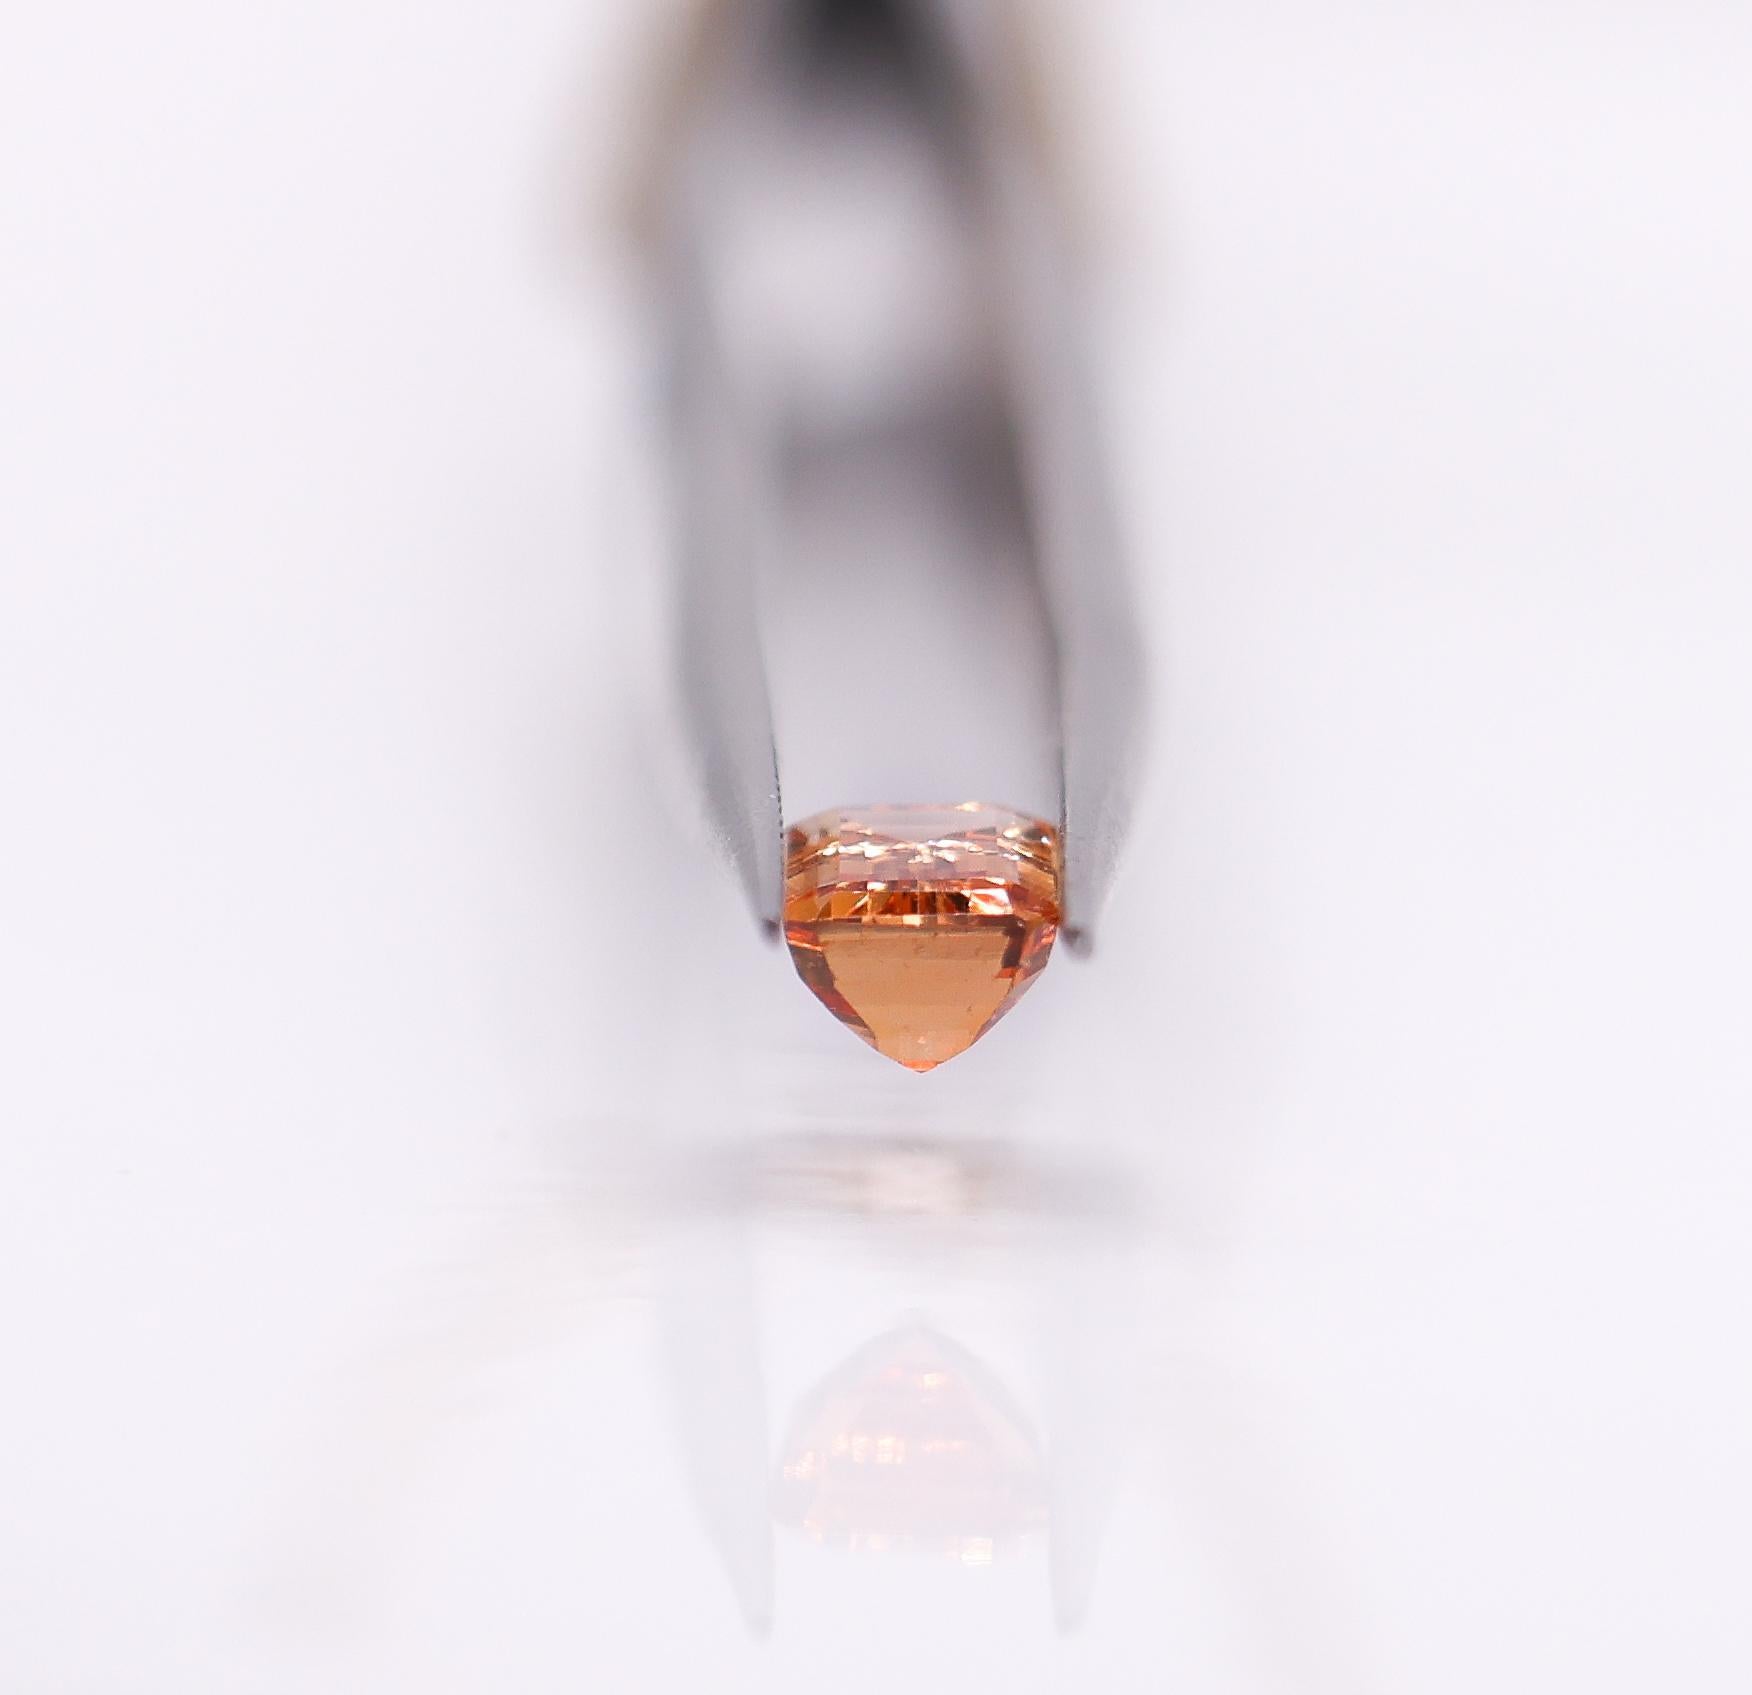 Presenting a 1.02 carat Imperial Topaz gemstone! A valuable addition to to any collection or jewelry piece! 

Specifications

Stone: Imperial Topaz
Shape: Emerald cut
Treatment: Heated
Hardness: 8
Cut: Faceted
Clarity: Eye clean
Number of Pieces: